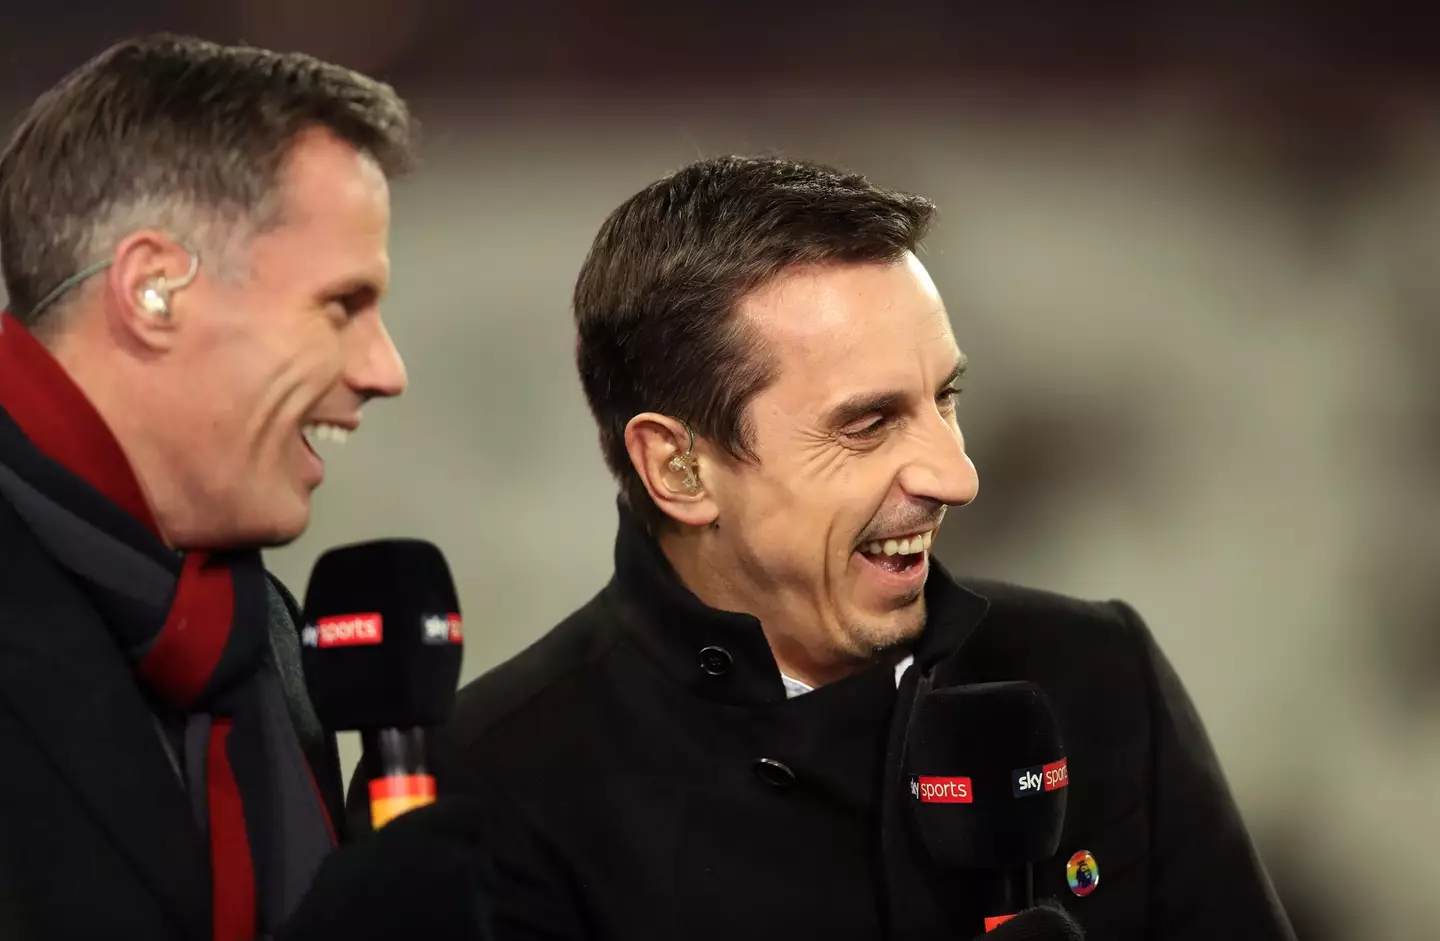 Neville and Carragher enjoy a laugh together. Image: Getty